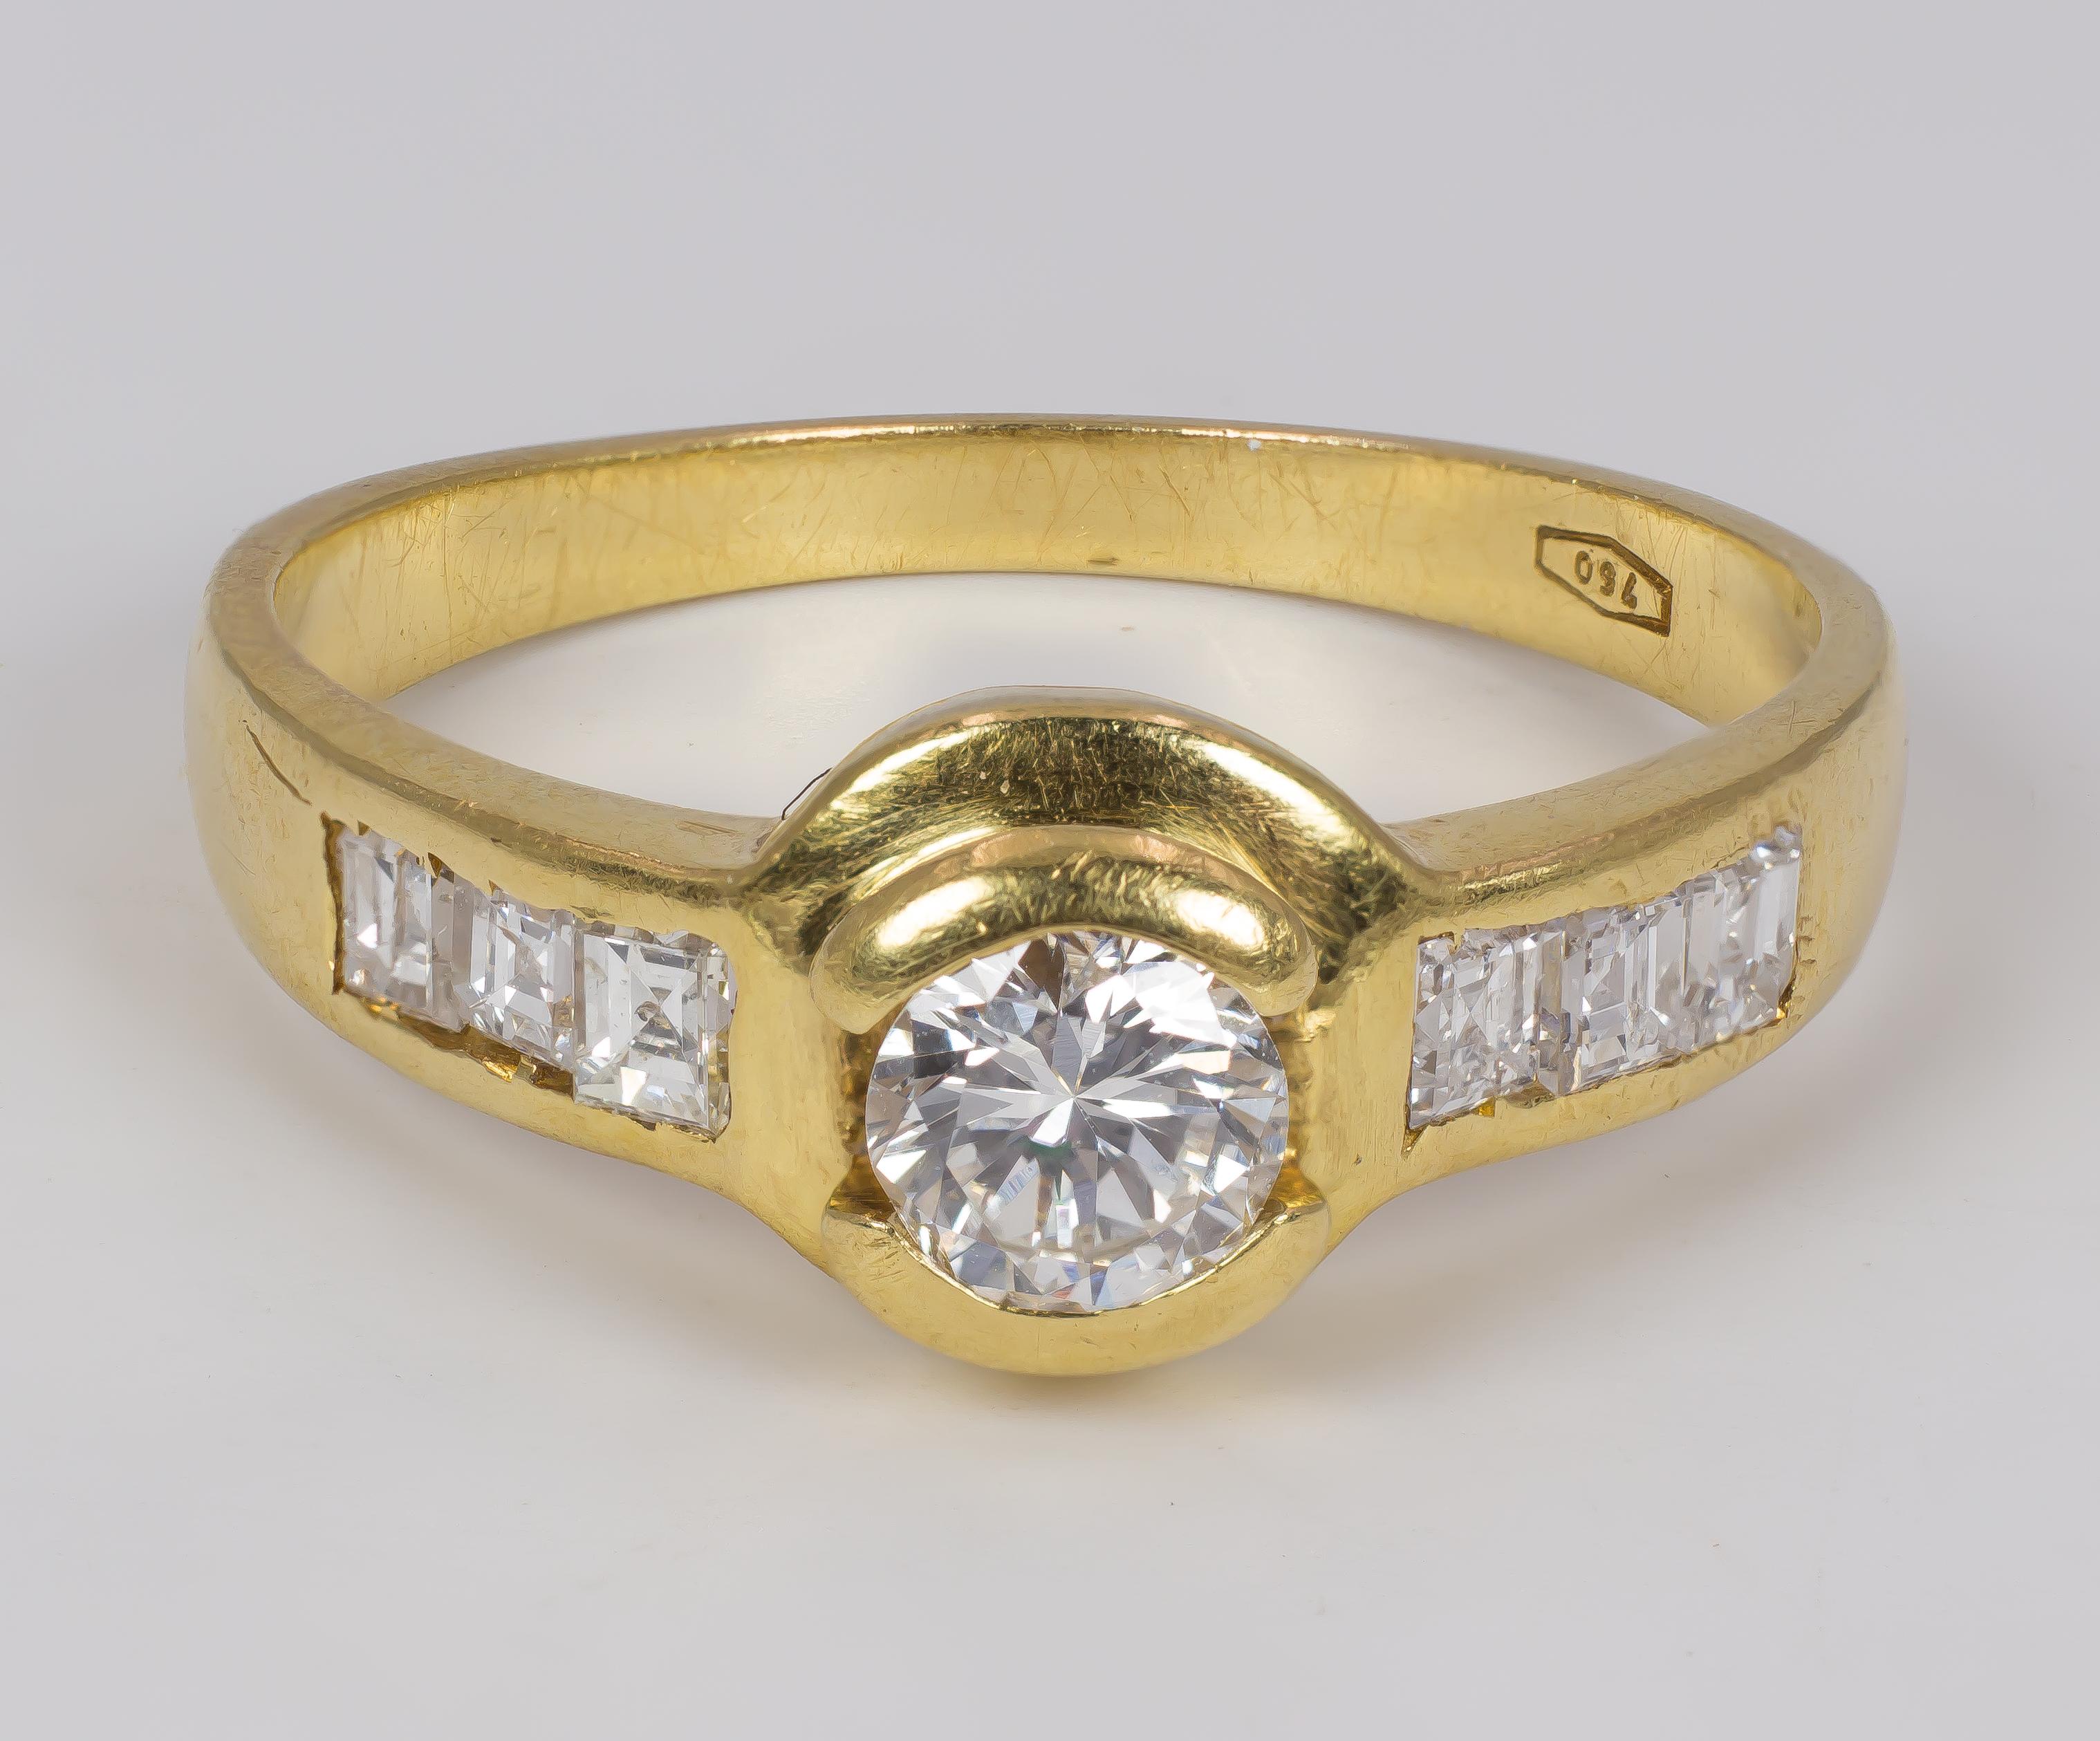 A fine vintage gold and diamond ring, dating from the 1960s. 
The head is set with a central 0.30ct round cut diamond, while the shoulders feature three baguette cut diamonds each one. 

MATERIALS
18K gold, one central round cut diamond (0.30ct) and